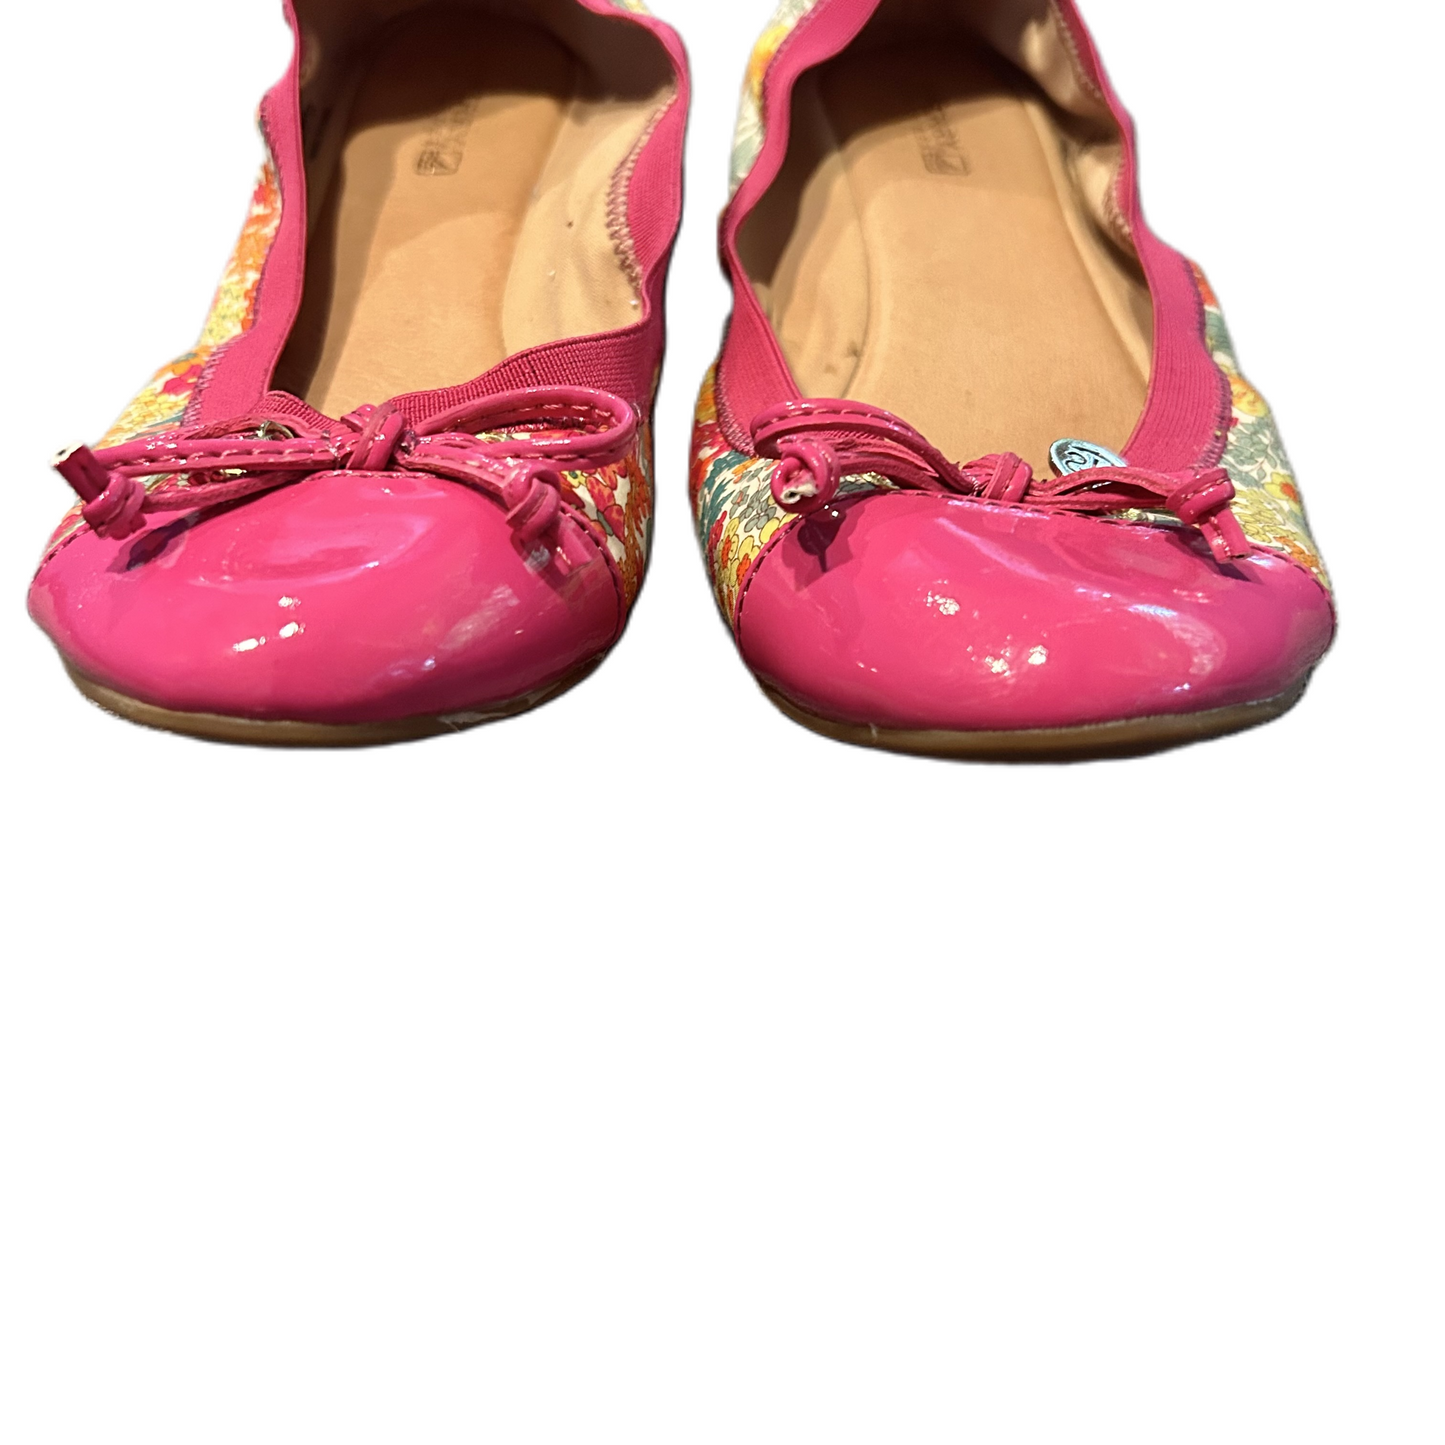 Shoes Flats By Sperry  Size: 10